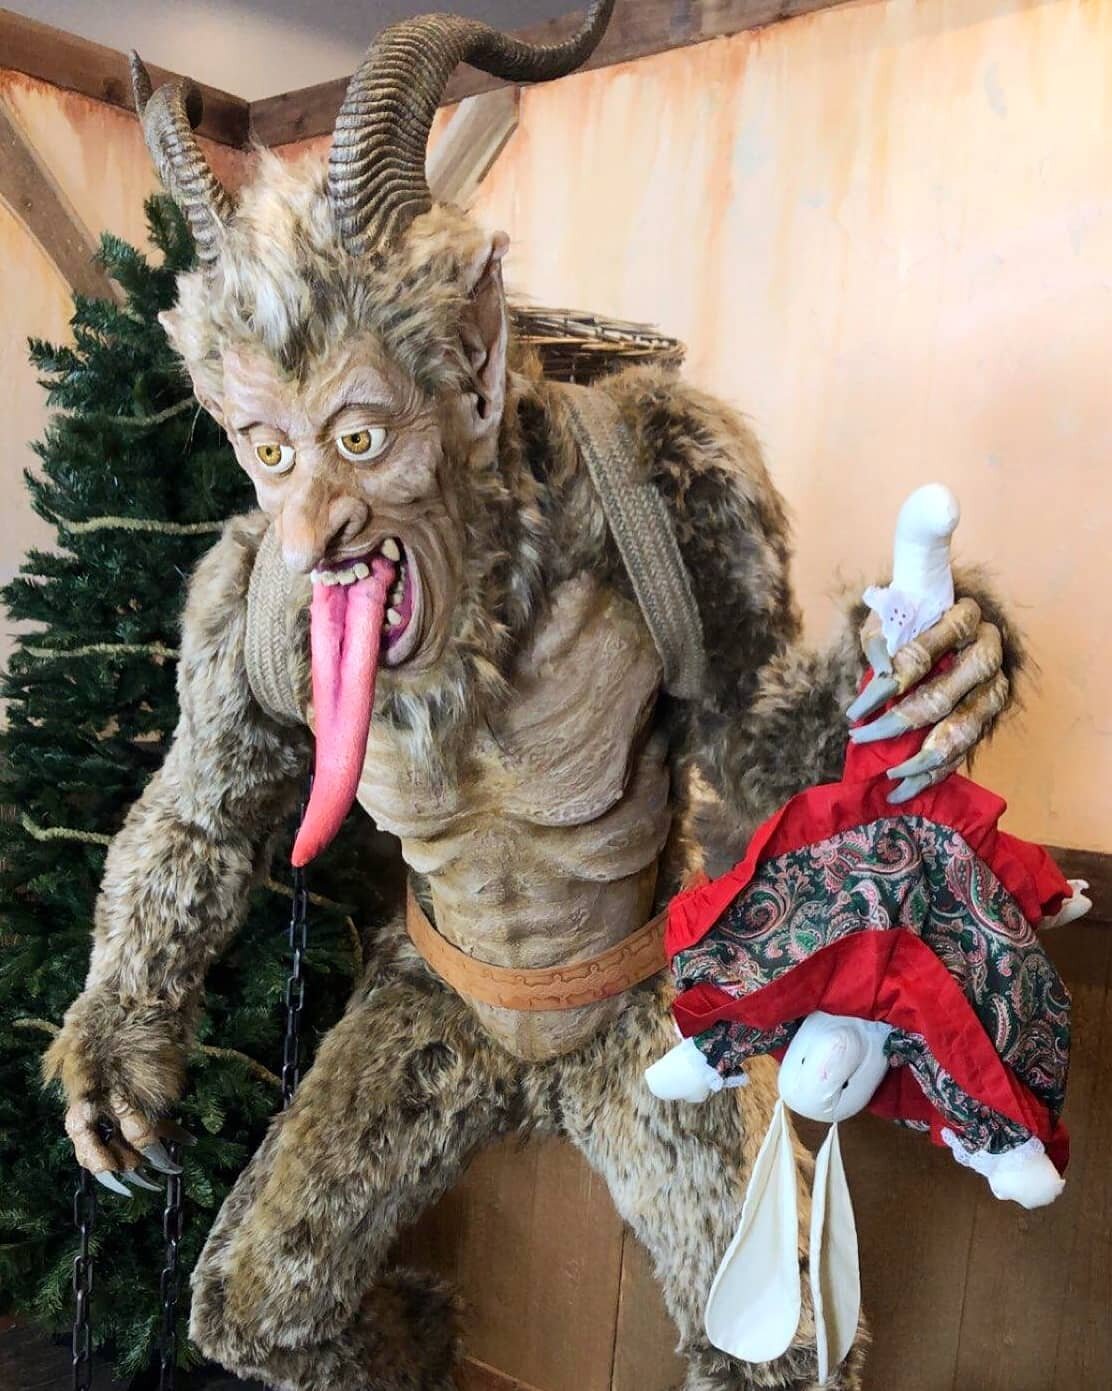 Krampus photo backdrop I put together for Christmas. This is a fabricated display at the Layton Hills Mall for photo ops. I cobbled together castings of existing characters I sculpted for the chest and face. The rest was fabricated by hand. 
-
Assist